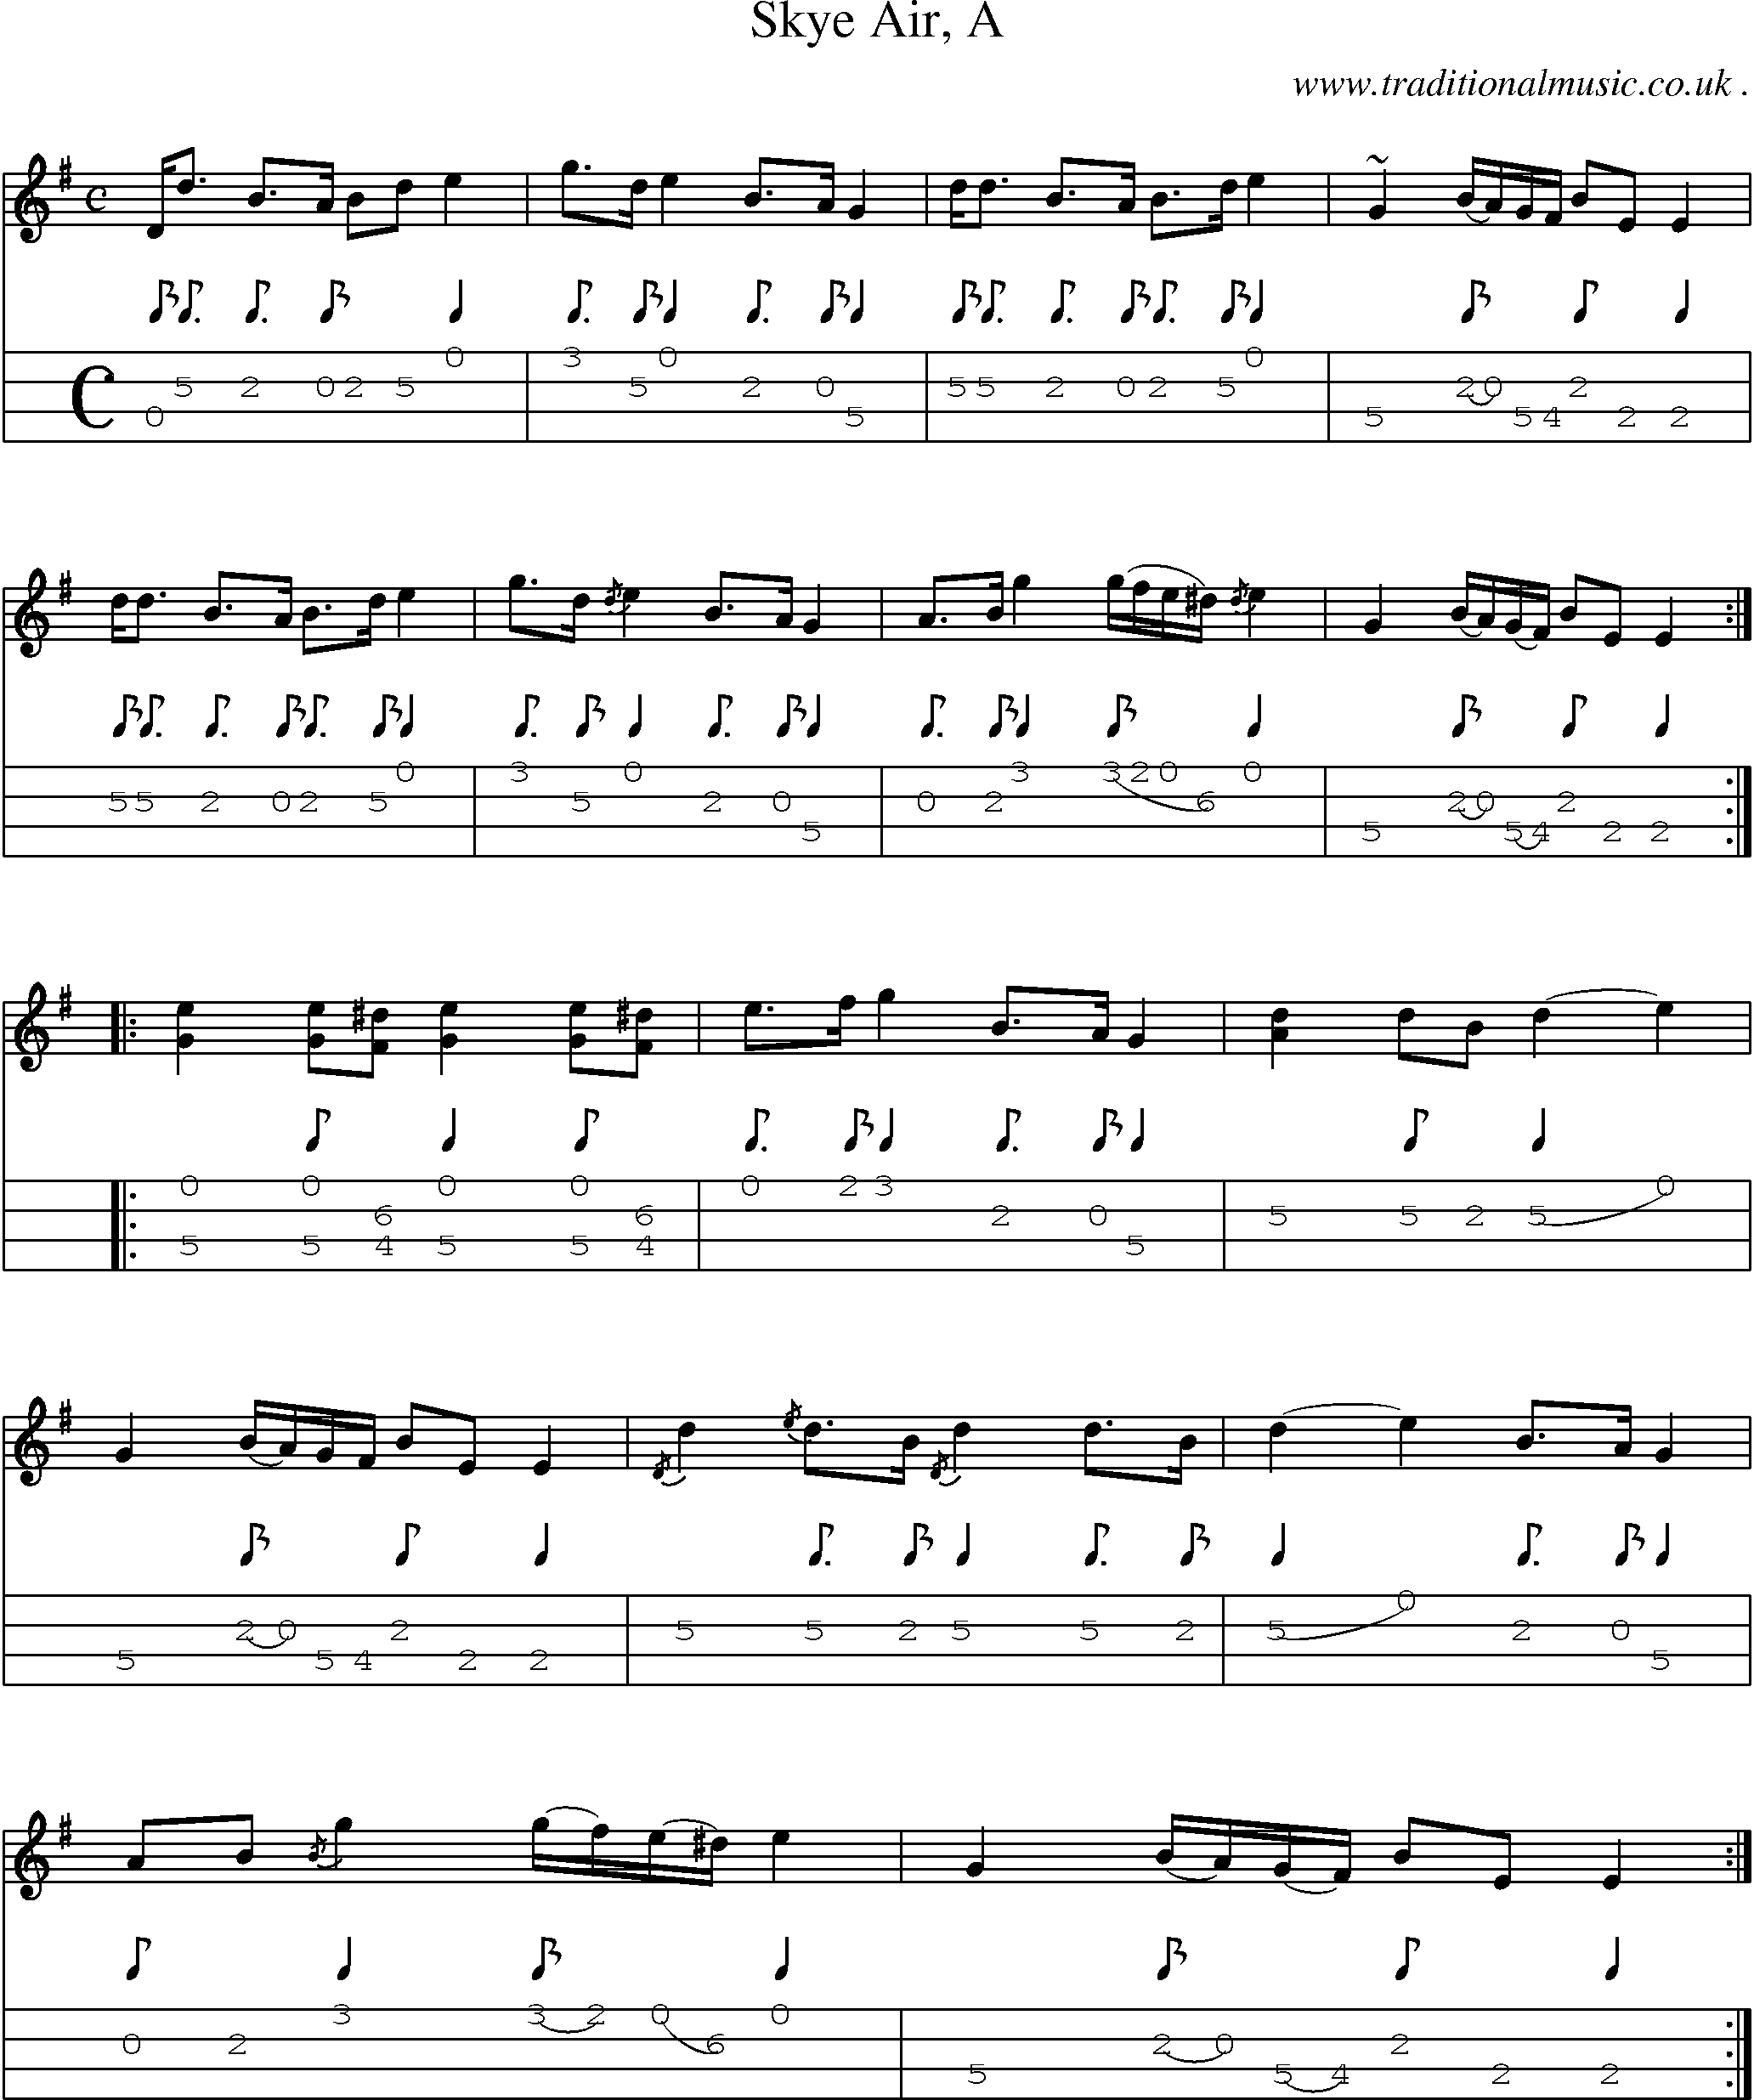 Sheet-music  score, Chords and Mandolin Tabs for Skye Air A